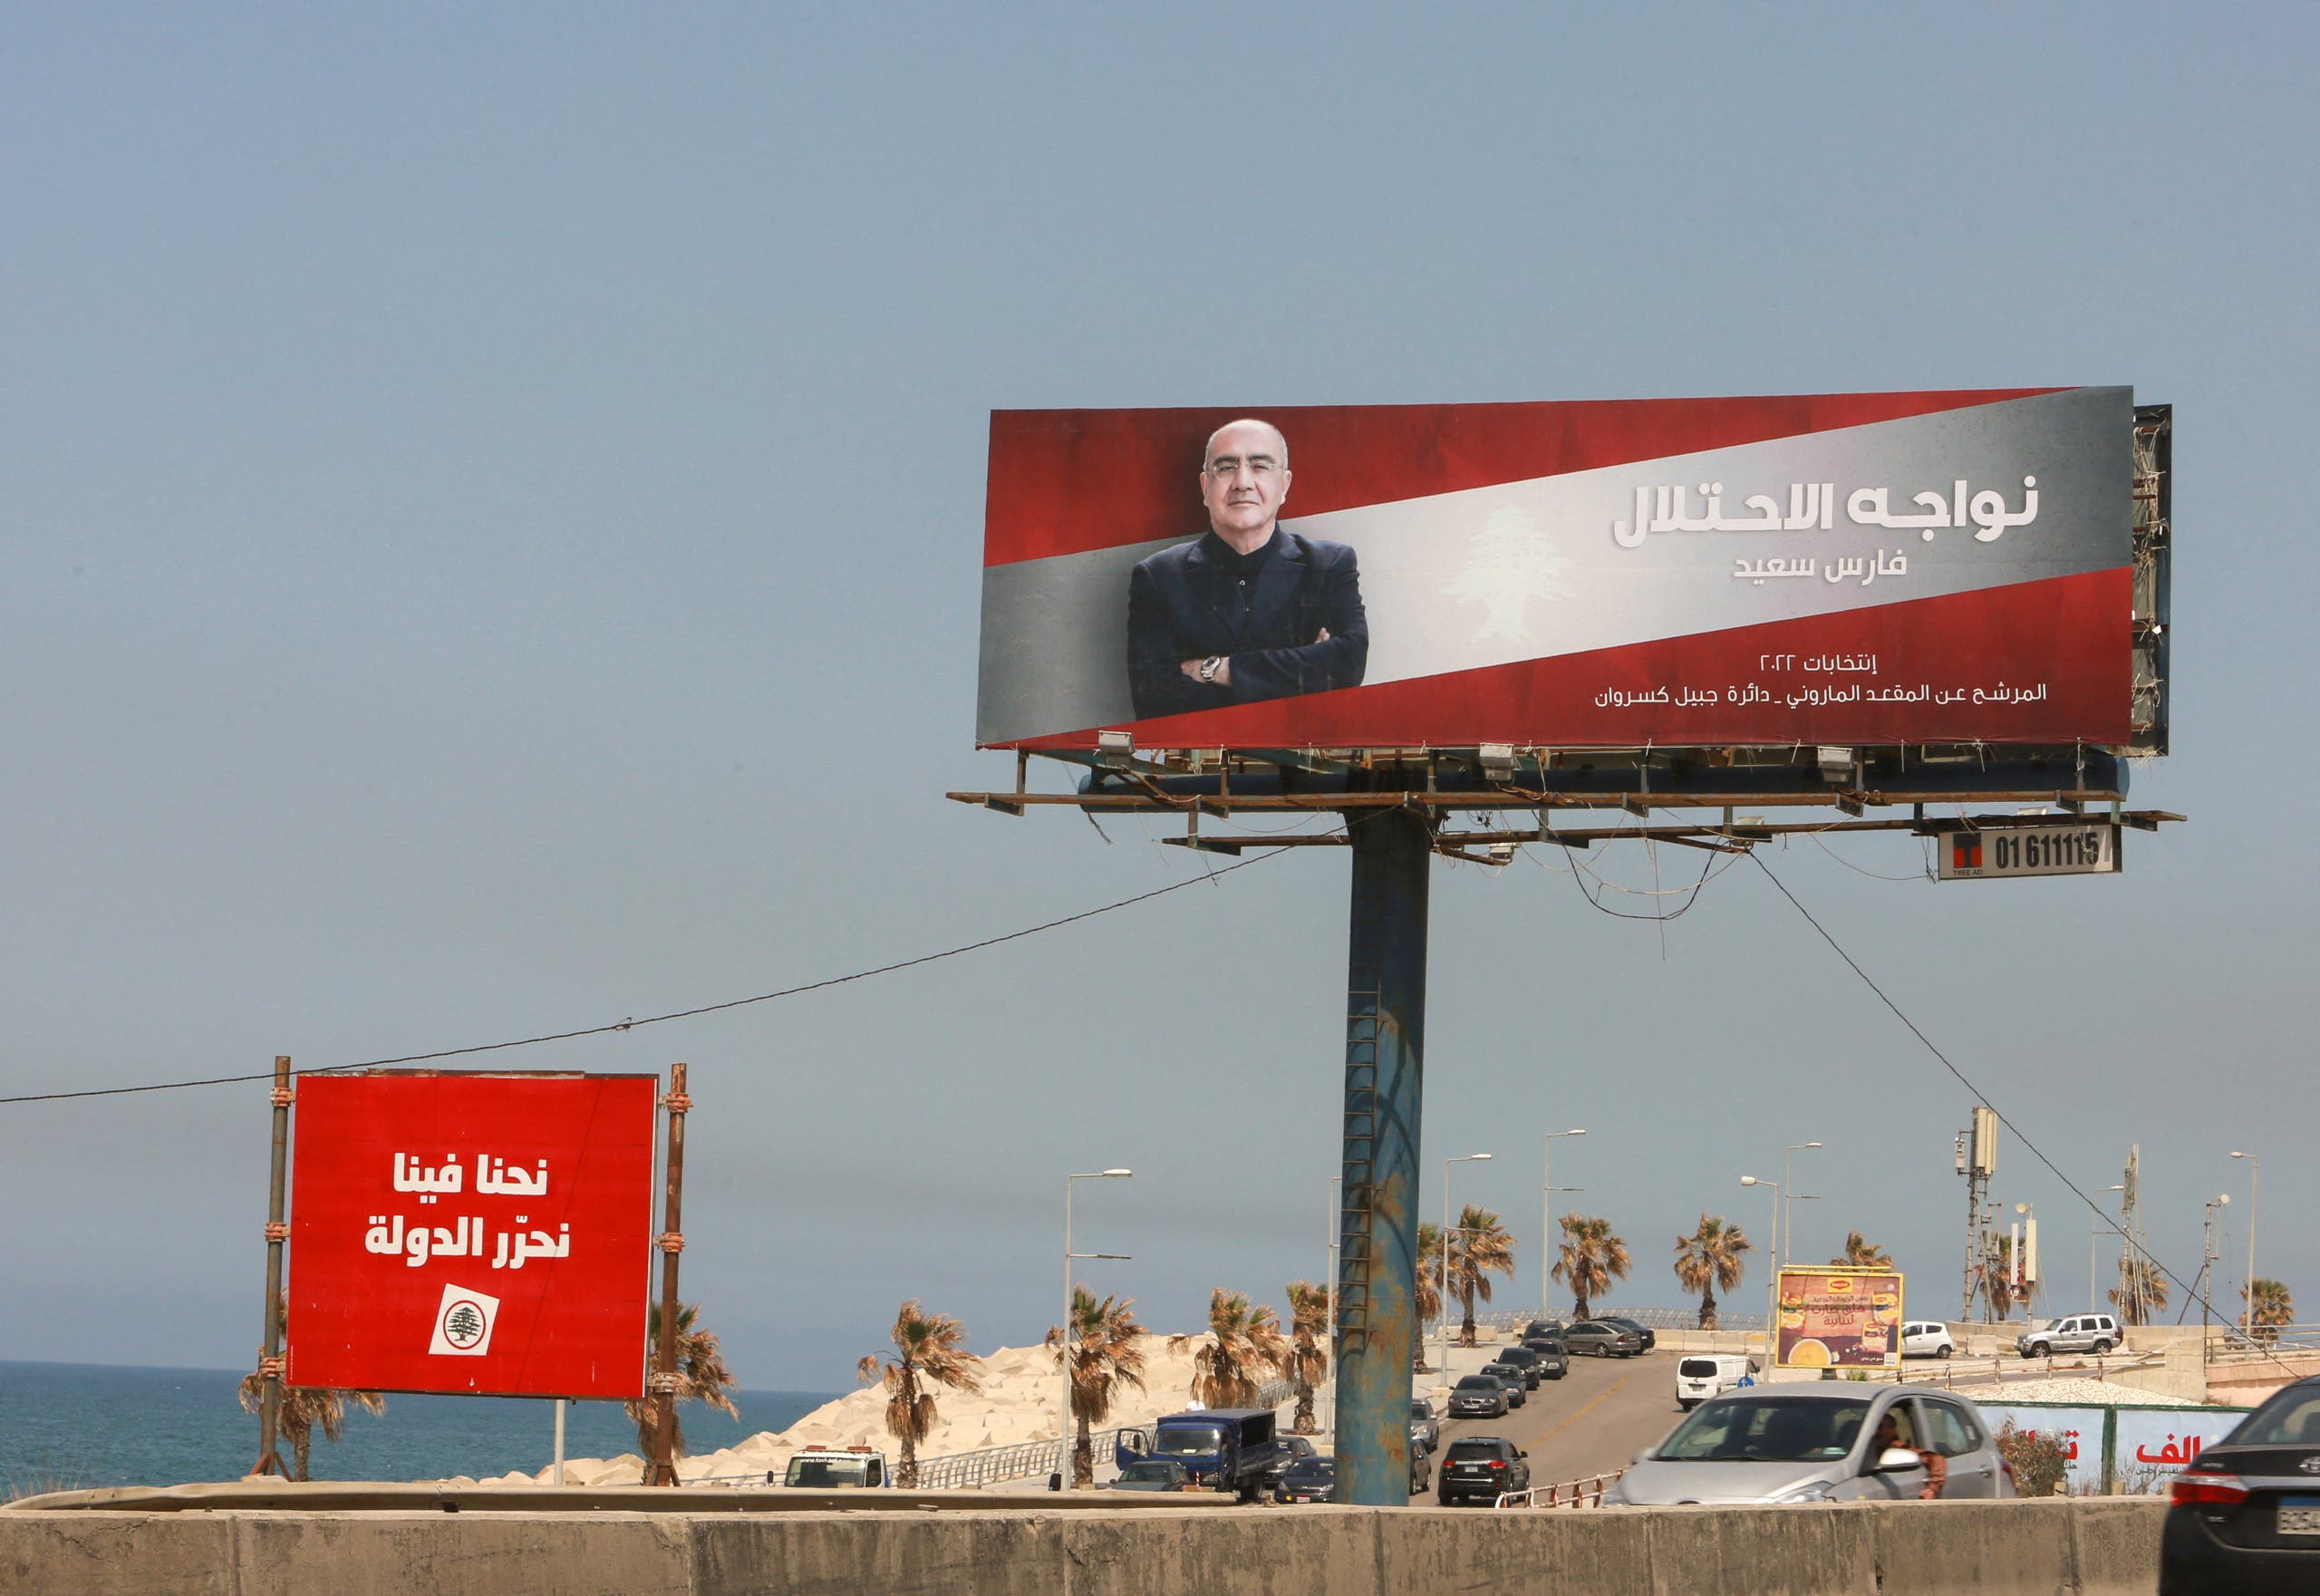 Election ads for candidates in Lebanon